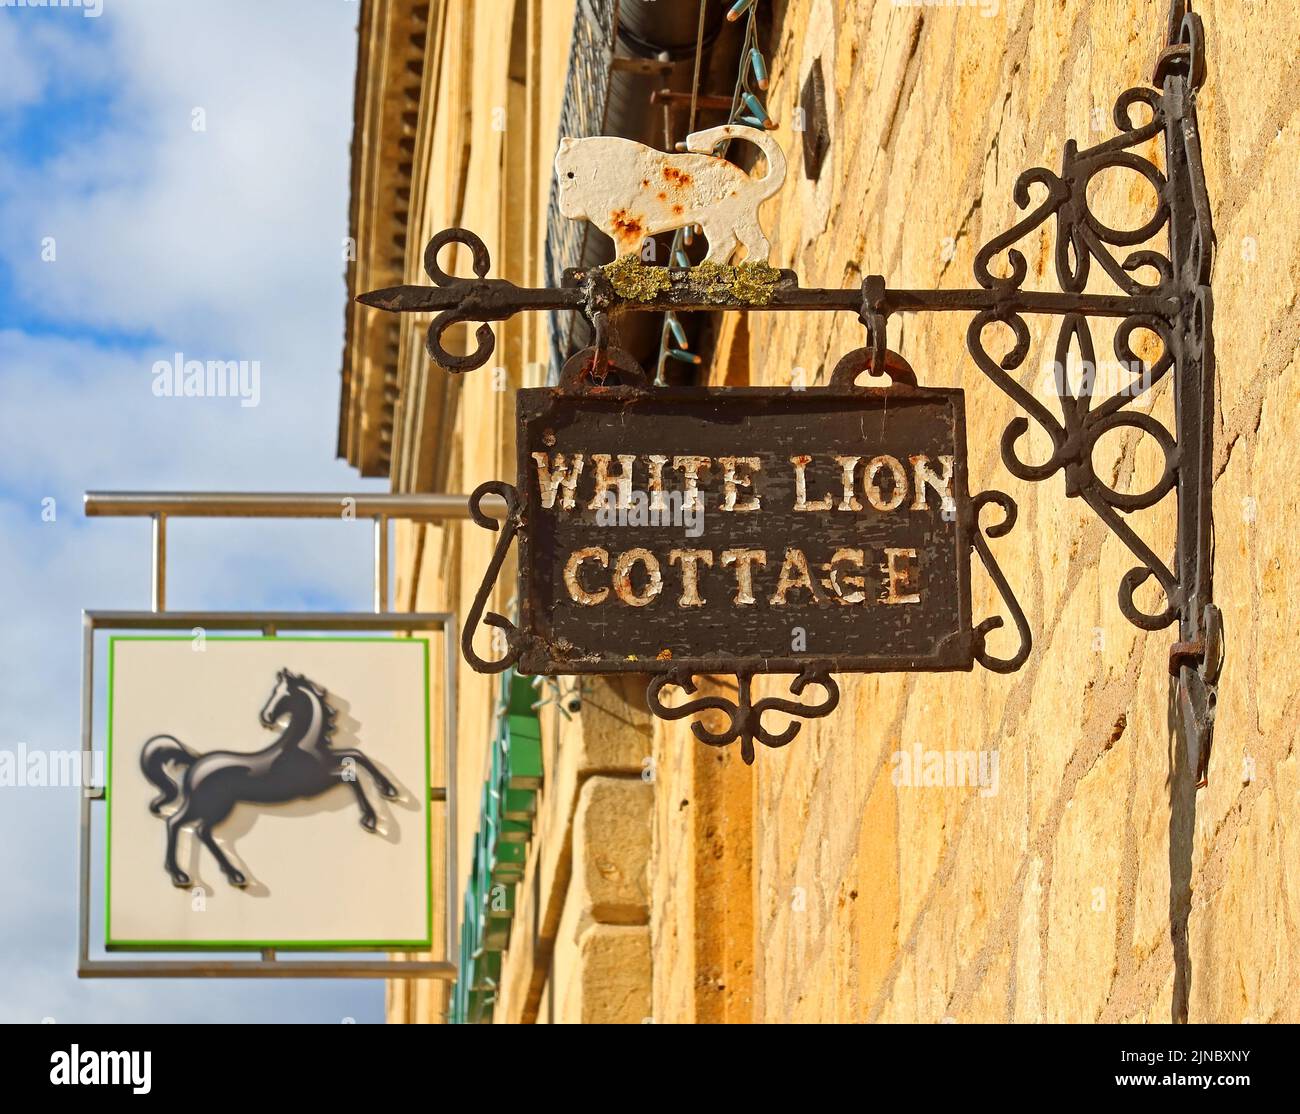 White Lion Cottage 1732, Lloyds, High St, Moreton-in-Marsh, Evenlode Valley, Cotswold District Council, Gloucestershire, England, UK, GL56 0AY Stock Photo